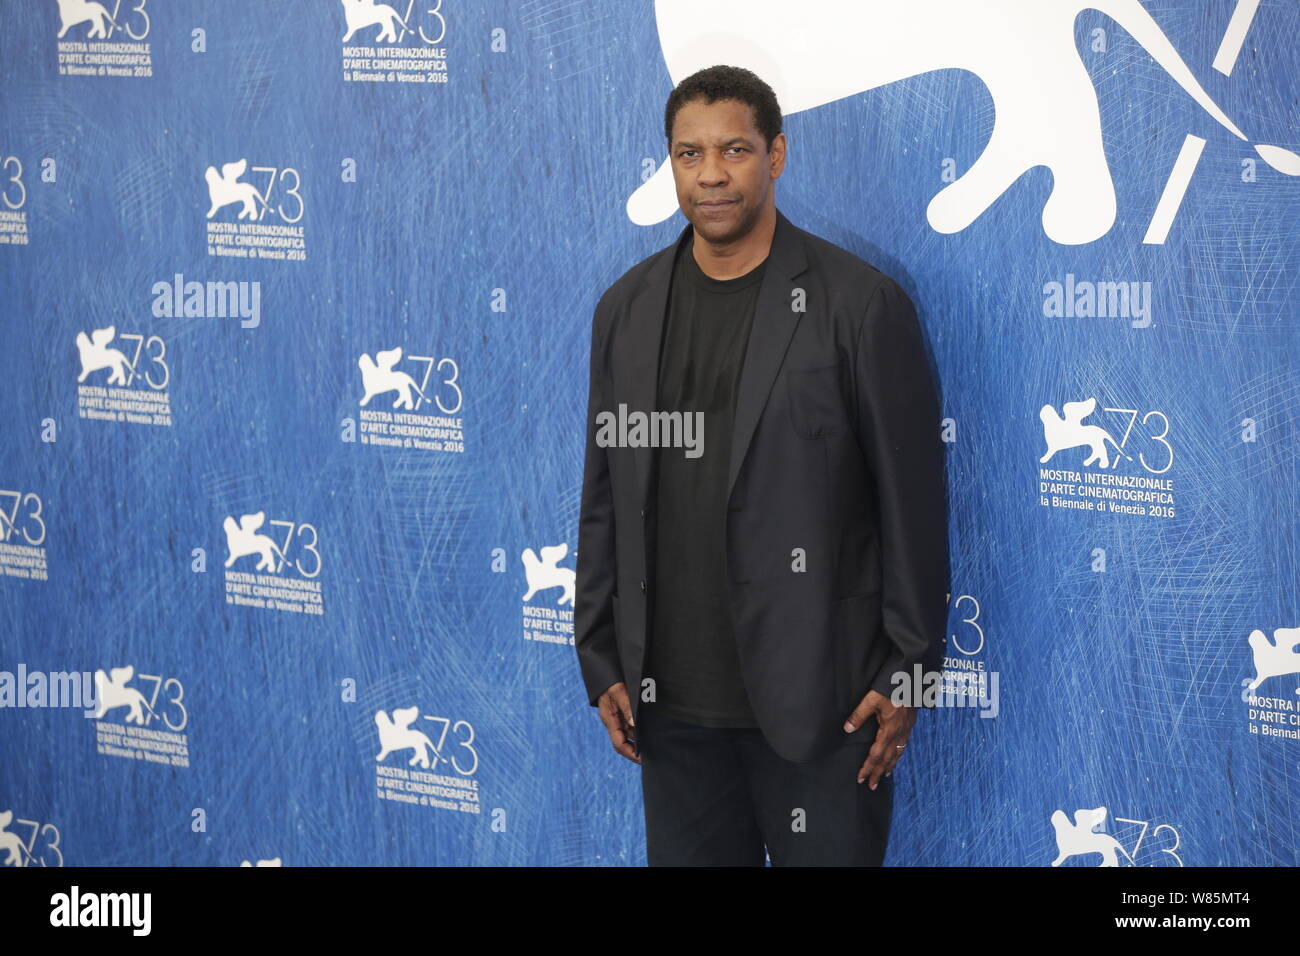 American actor Denzel Washington attends a press conference for his movie "The Magnificent Seven" during the 73rd Venice Film Festival in Venice, Ital Stock Photo